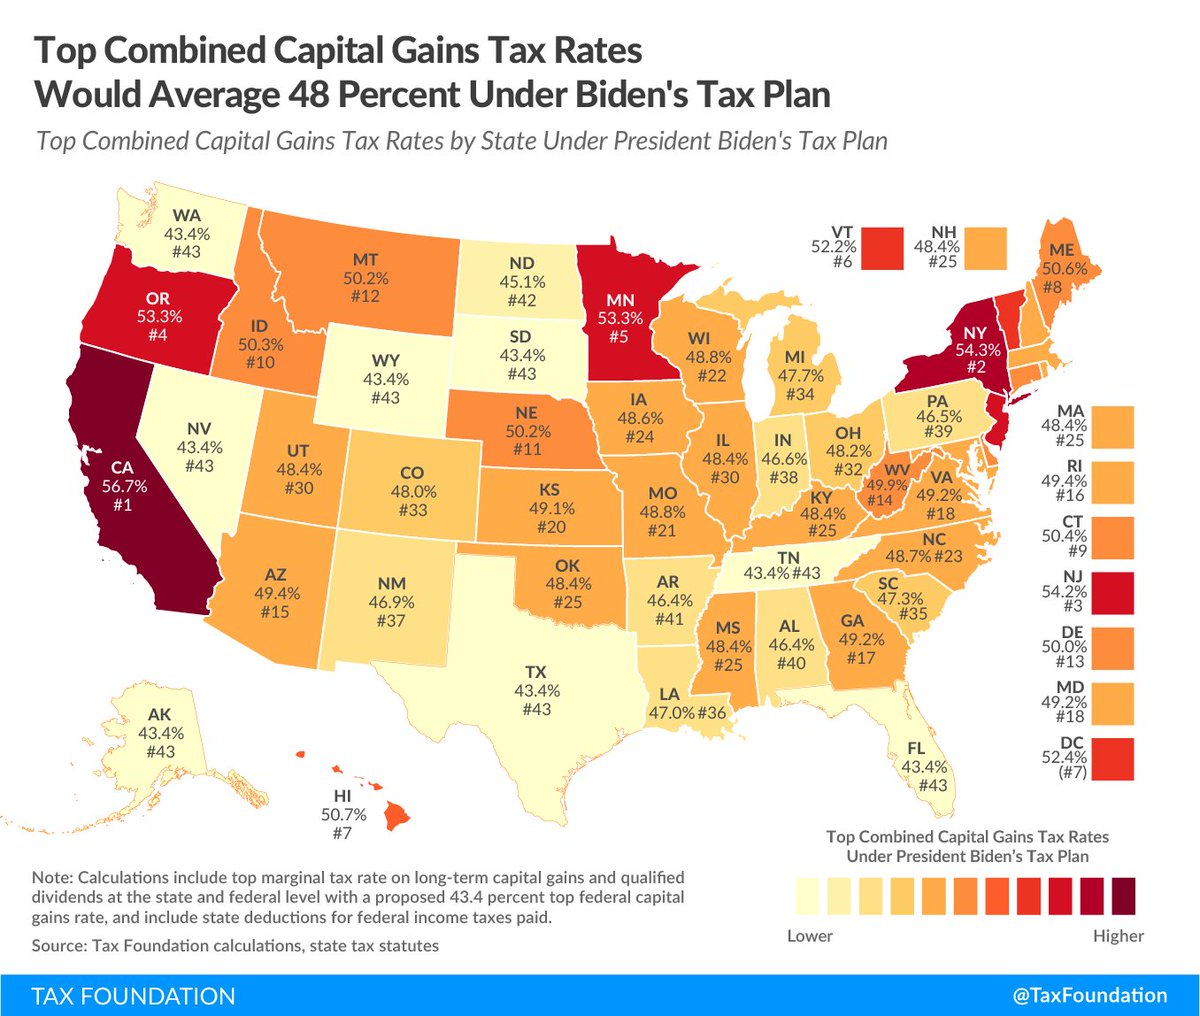 Under President Biden's tax plan, 13 states and D.C. would have a top combined capital gains tax rate at or above 50%:56.7% CA54.3% NY54.2% NJ53.3% OR53.3% MN52.4% DC52.2% VT50.7% HI50.6% ME50.4% CT50.3% ID50.2% NE50.2% MT50.0% DE(58.2% NYC)(57.3% Portland, OR)